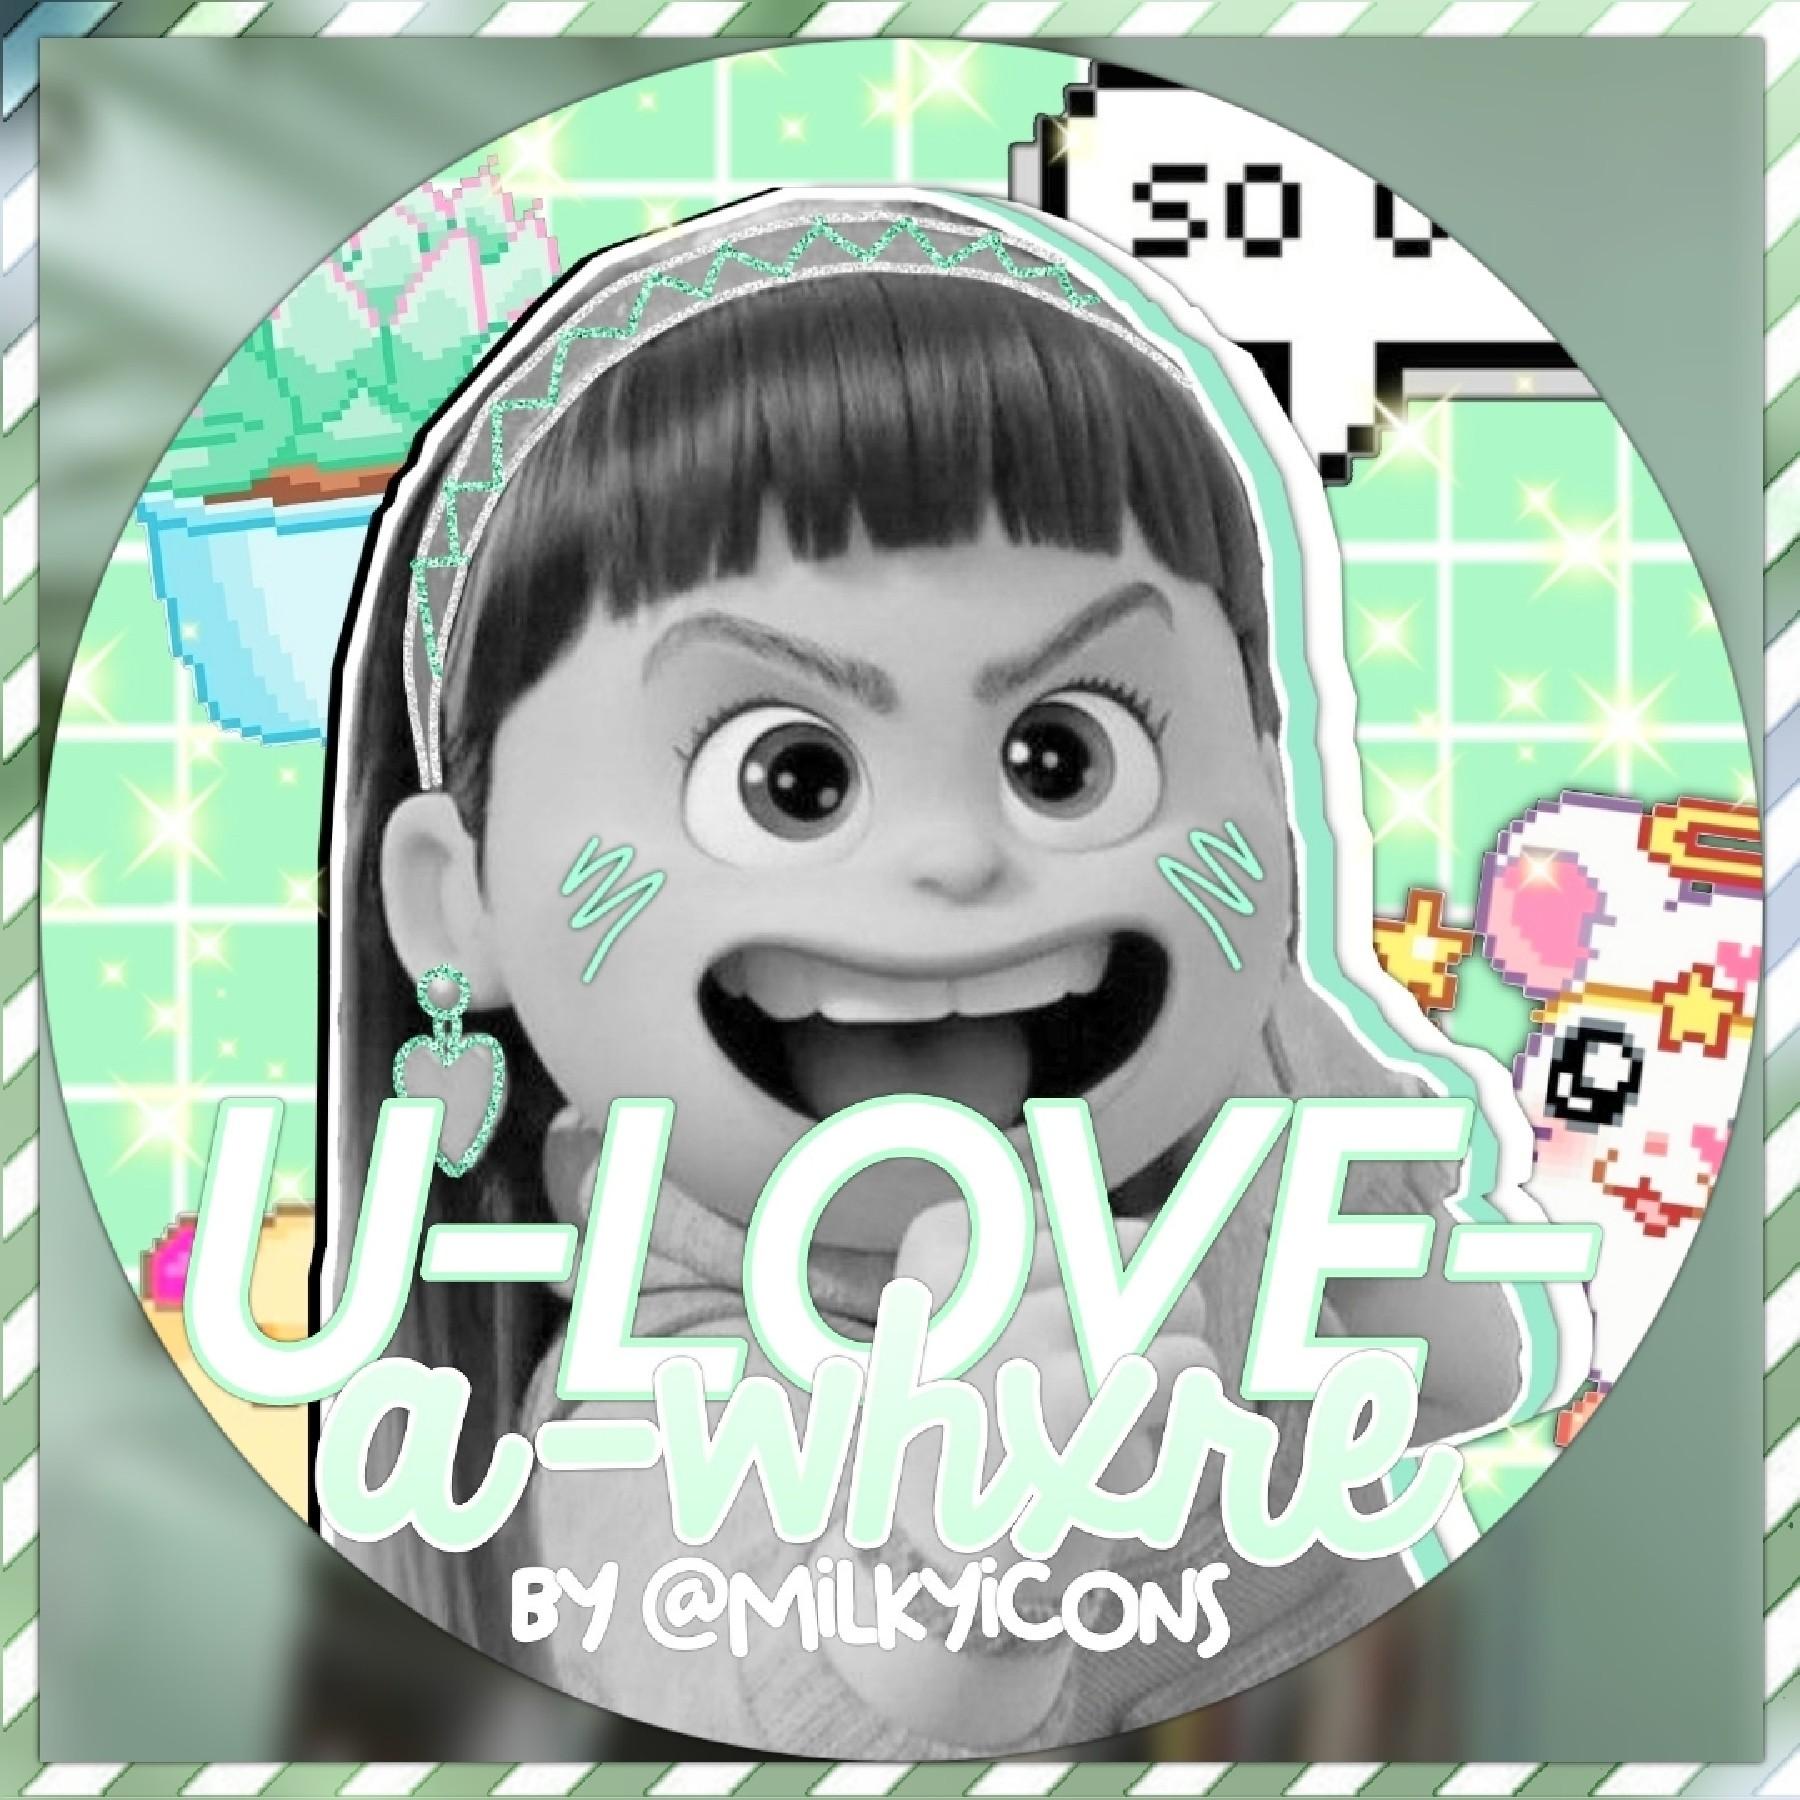 icon for: u-love-a-whxre
style: pastel
color: mint green🍏
hope you like it!!💗 pls give credits if used❤️